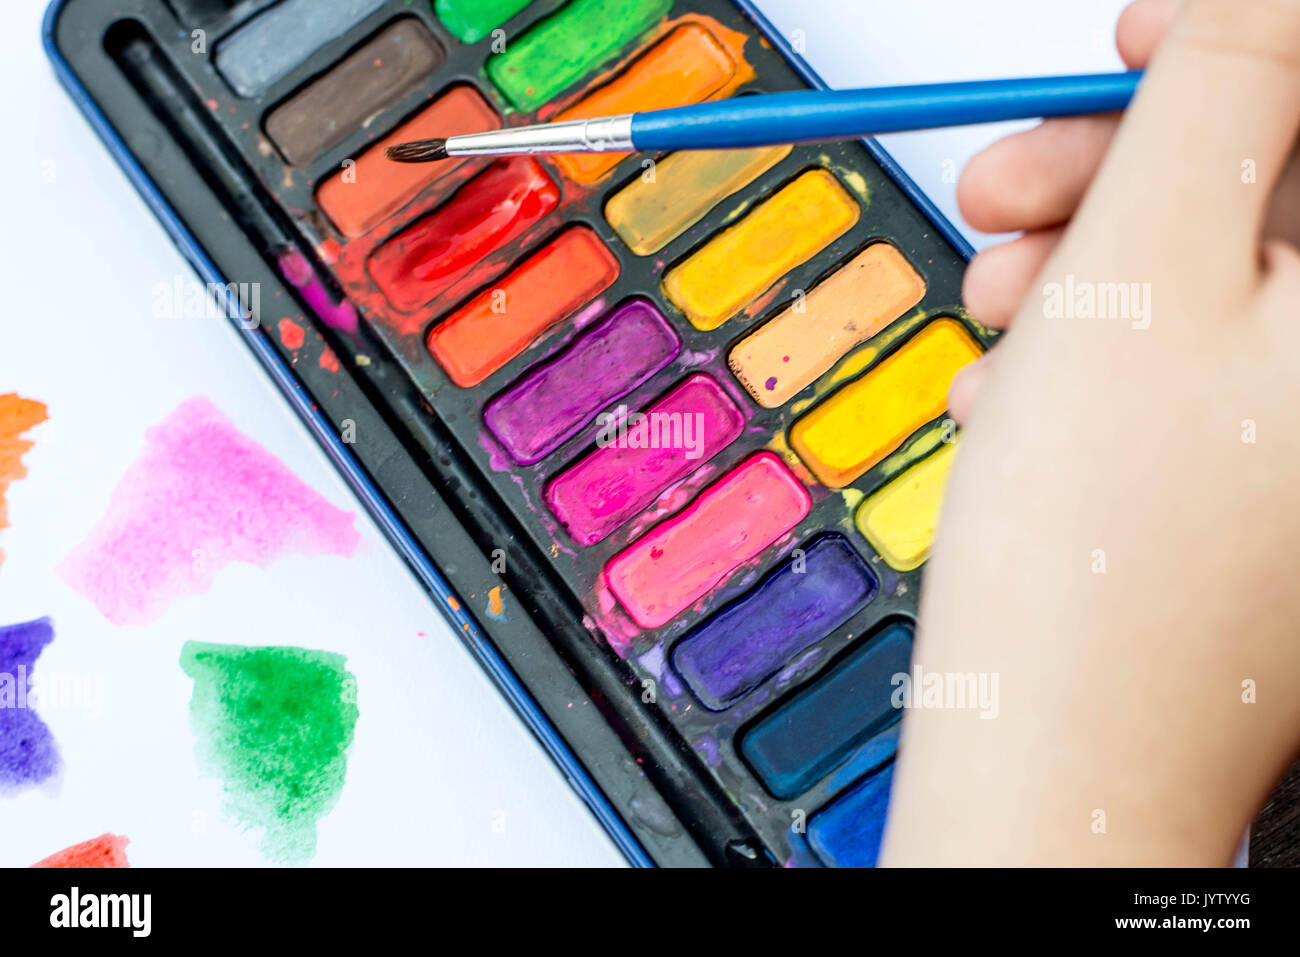 Child Painting With Watercolor Paints on a White Paper Book In Natural Light Stock Photo